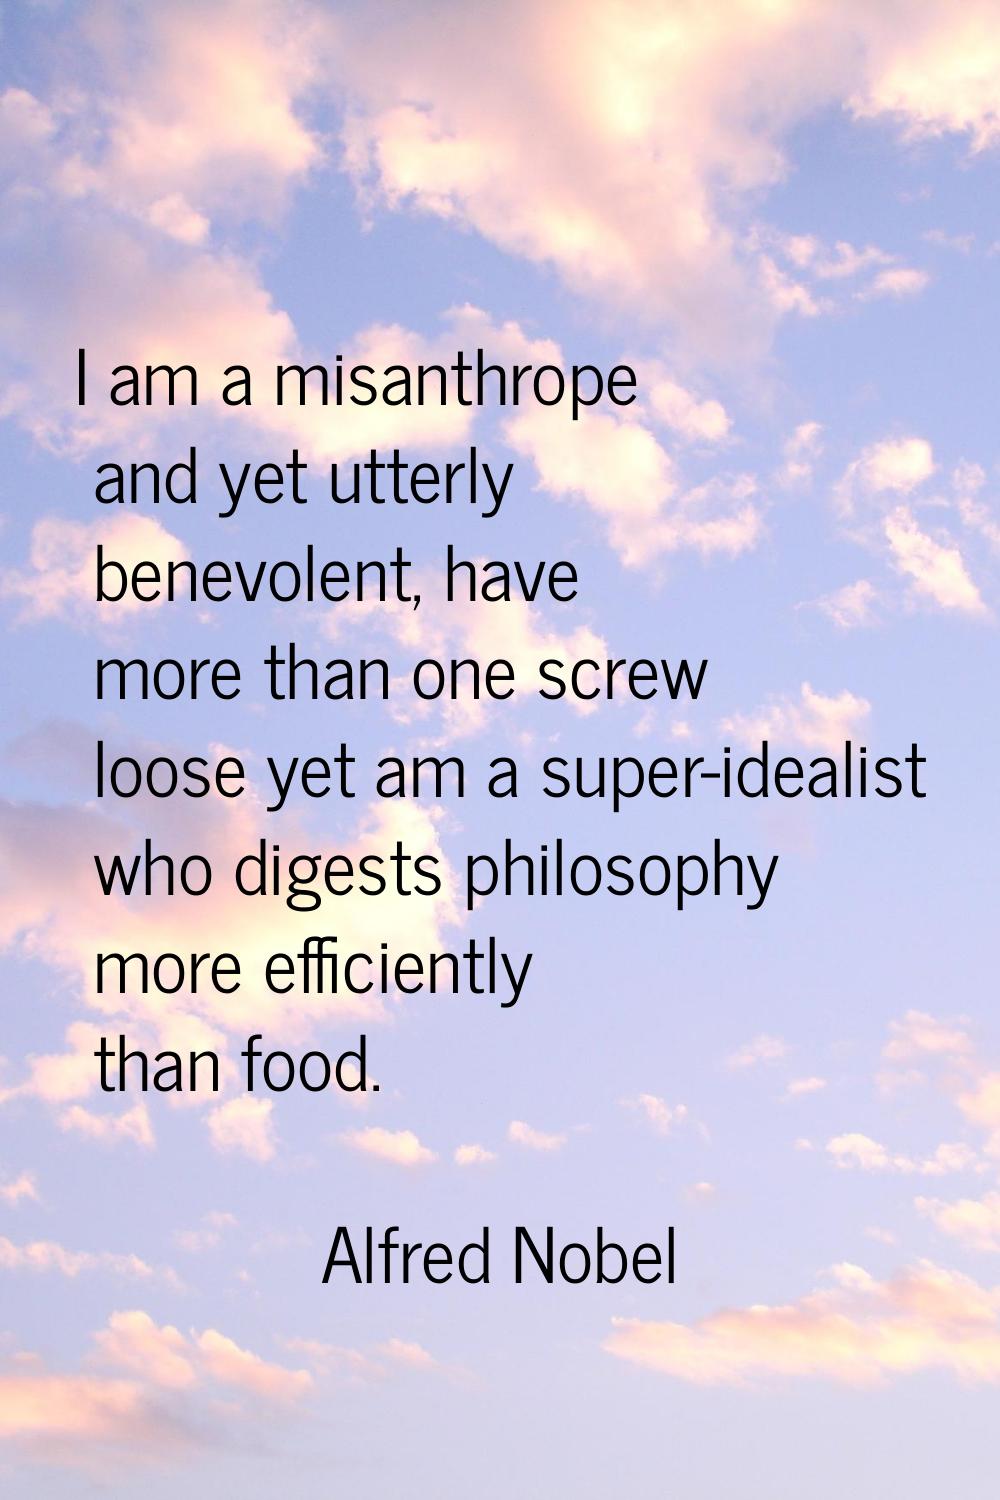 I am a misanthrope and yet utterly benevolent, have more than one screw loose yet am a super-ideali